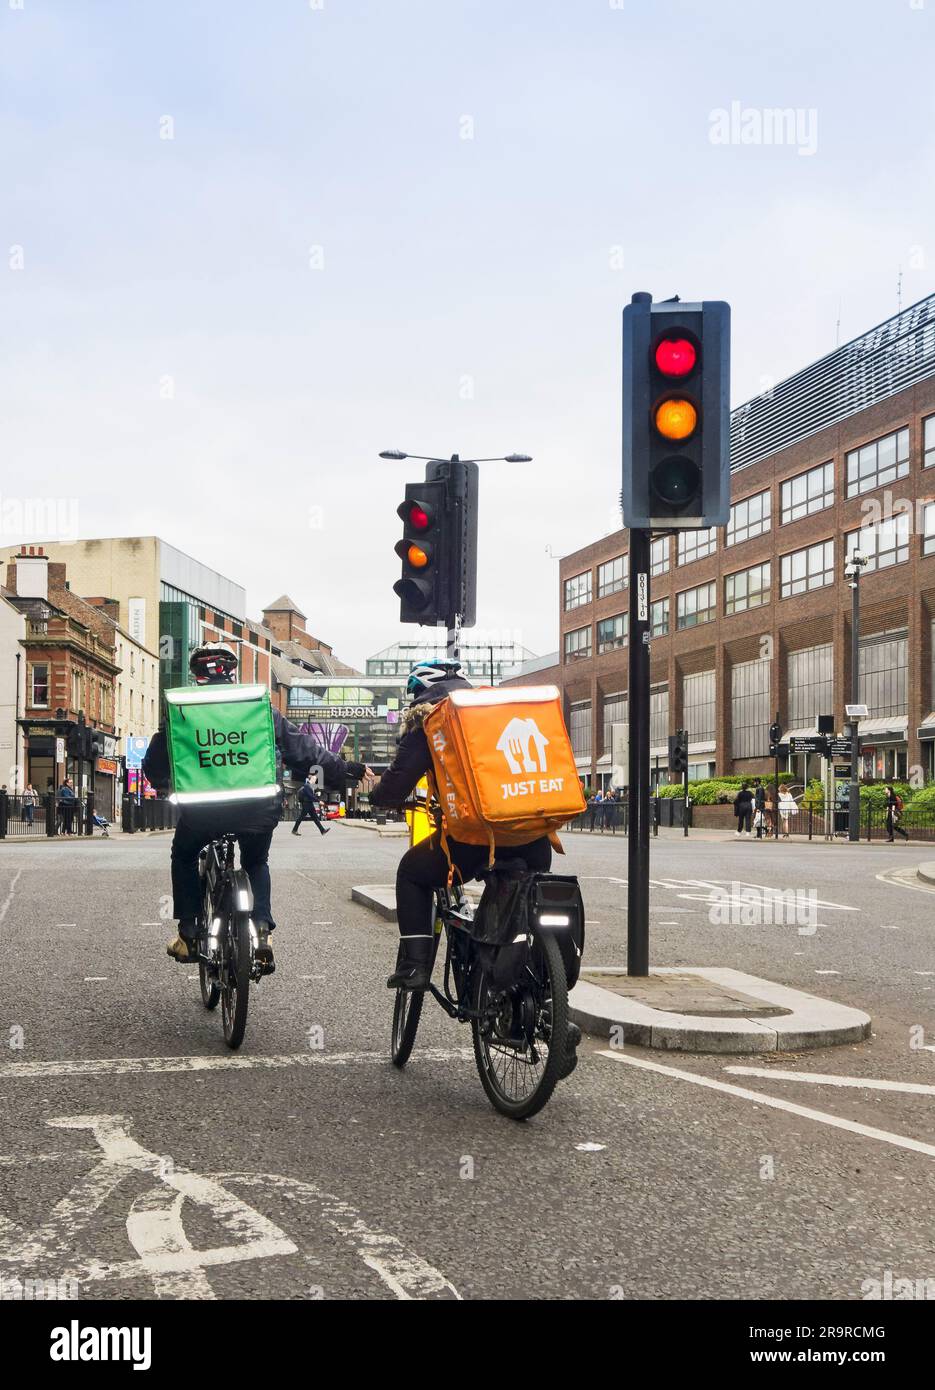 Uber Eats and Just Eat cucle couriers at traffic lights in Newcastle upon Tyne, UK Stock Photo